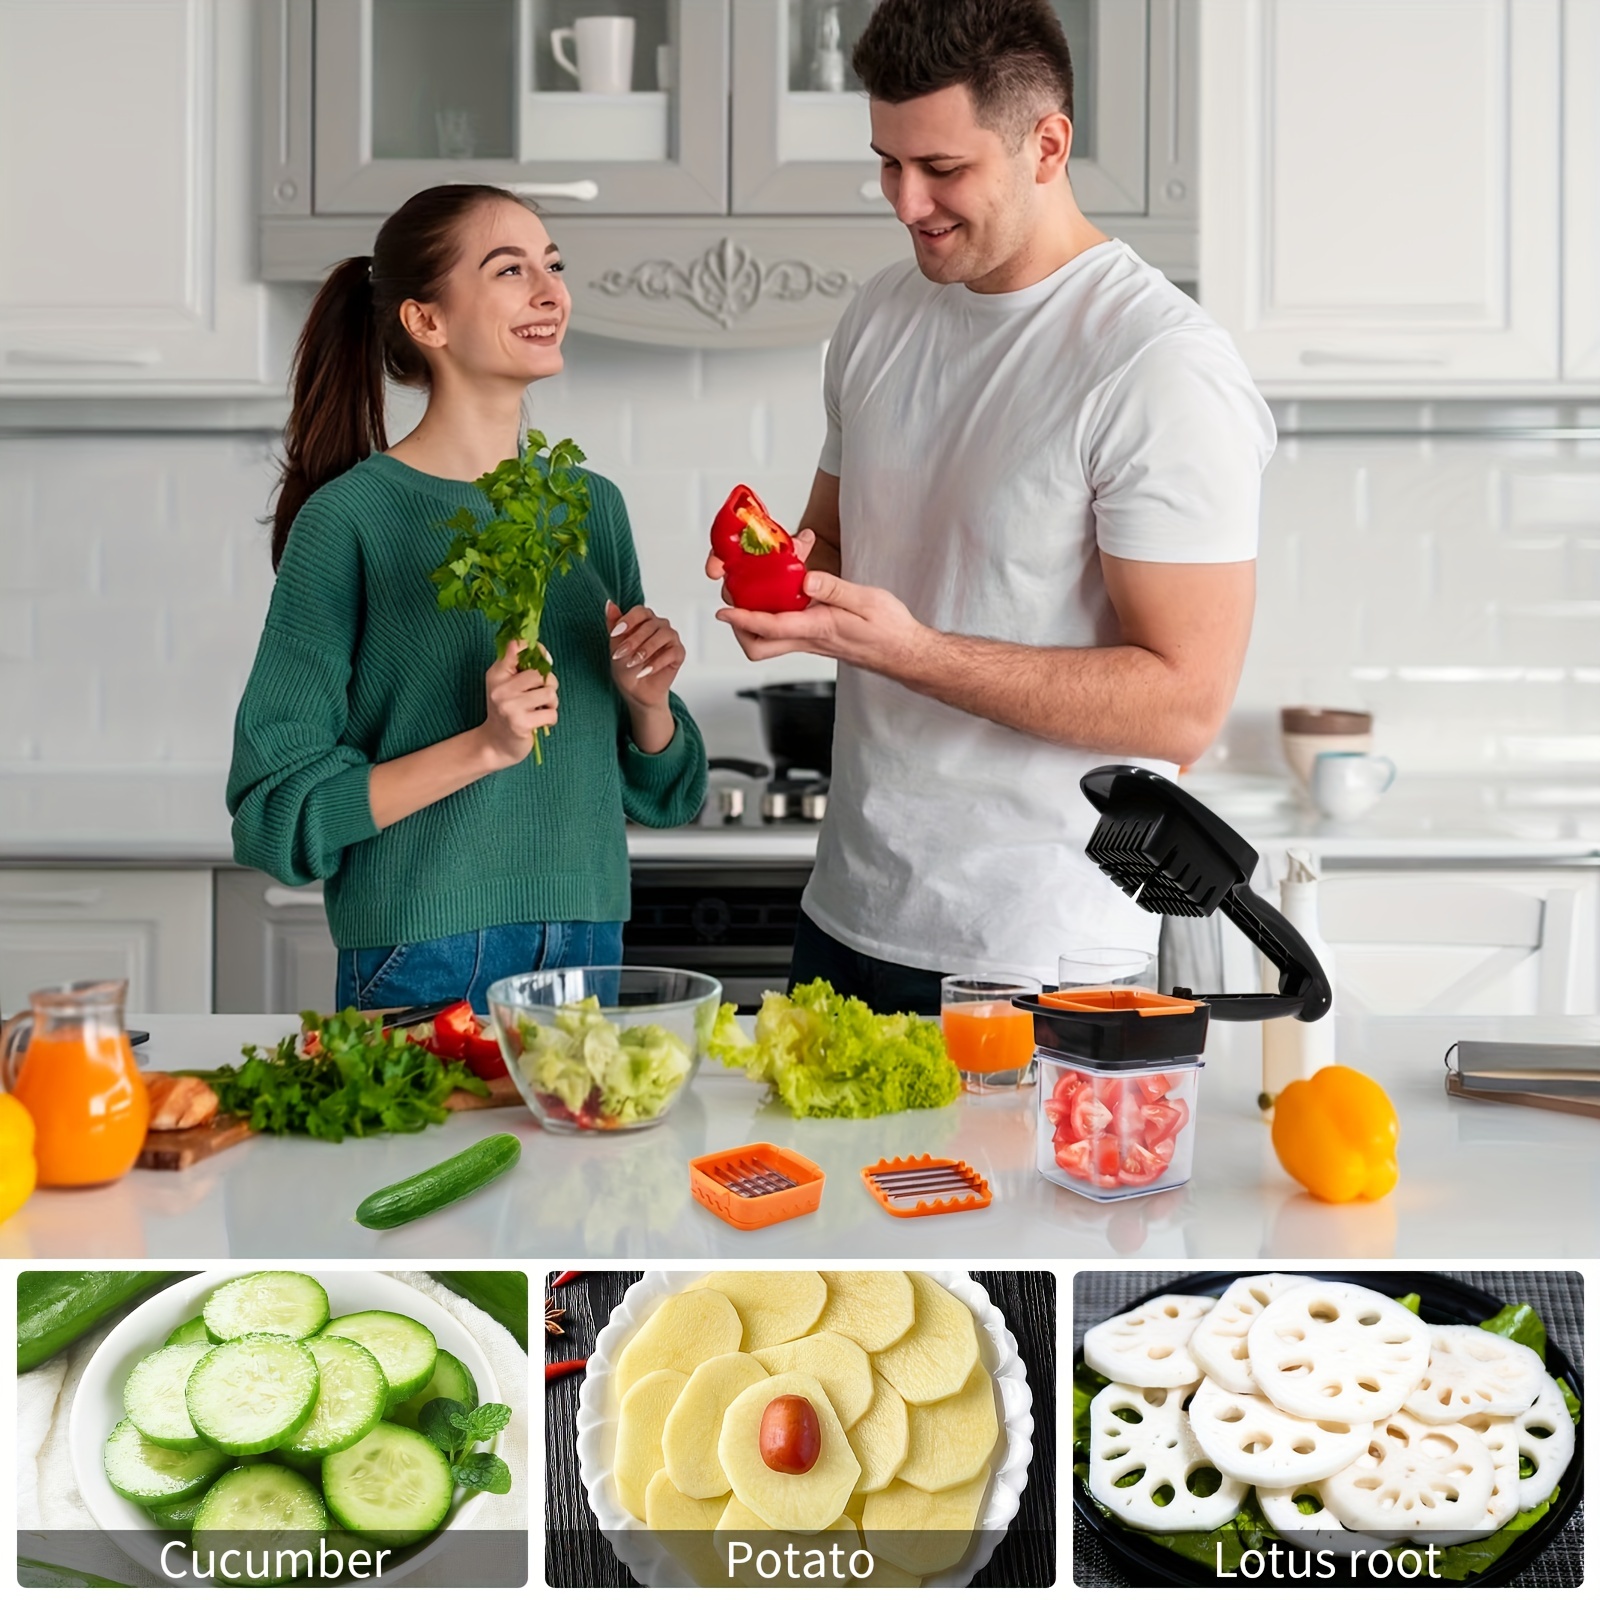  Vegetable chopper with Container, Onion Cutter, Multifuctional  15 in 1 Food Chopper, Chopper Vegetable cutter, Veggie Chopper With 10  Blades, Salad Chopper, Good Helper in Kitchen, White: Home & Kitchen